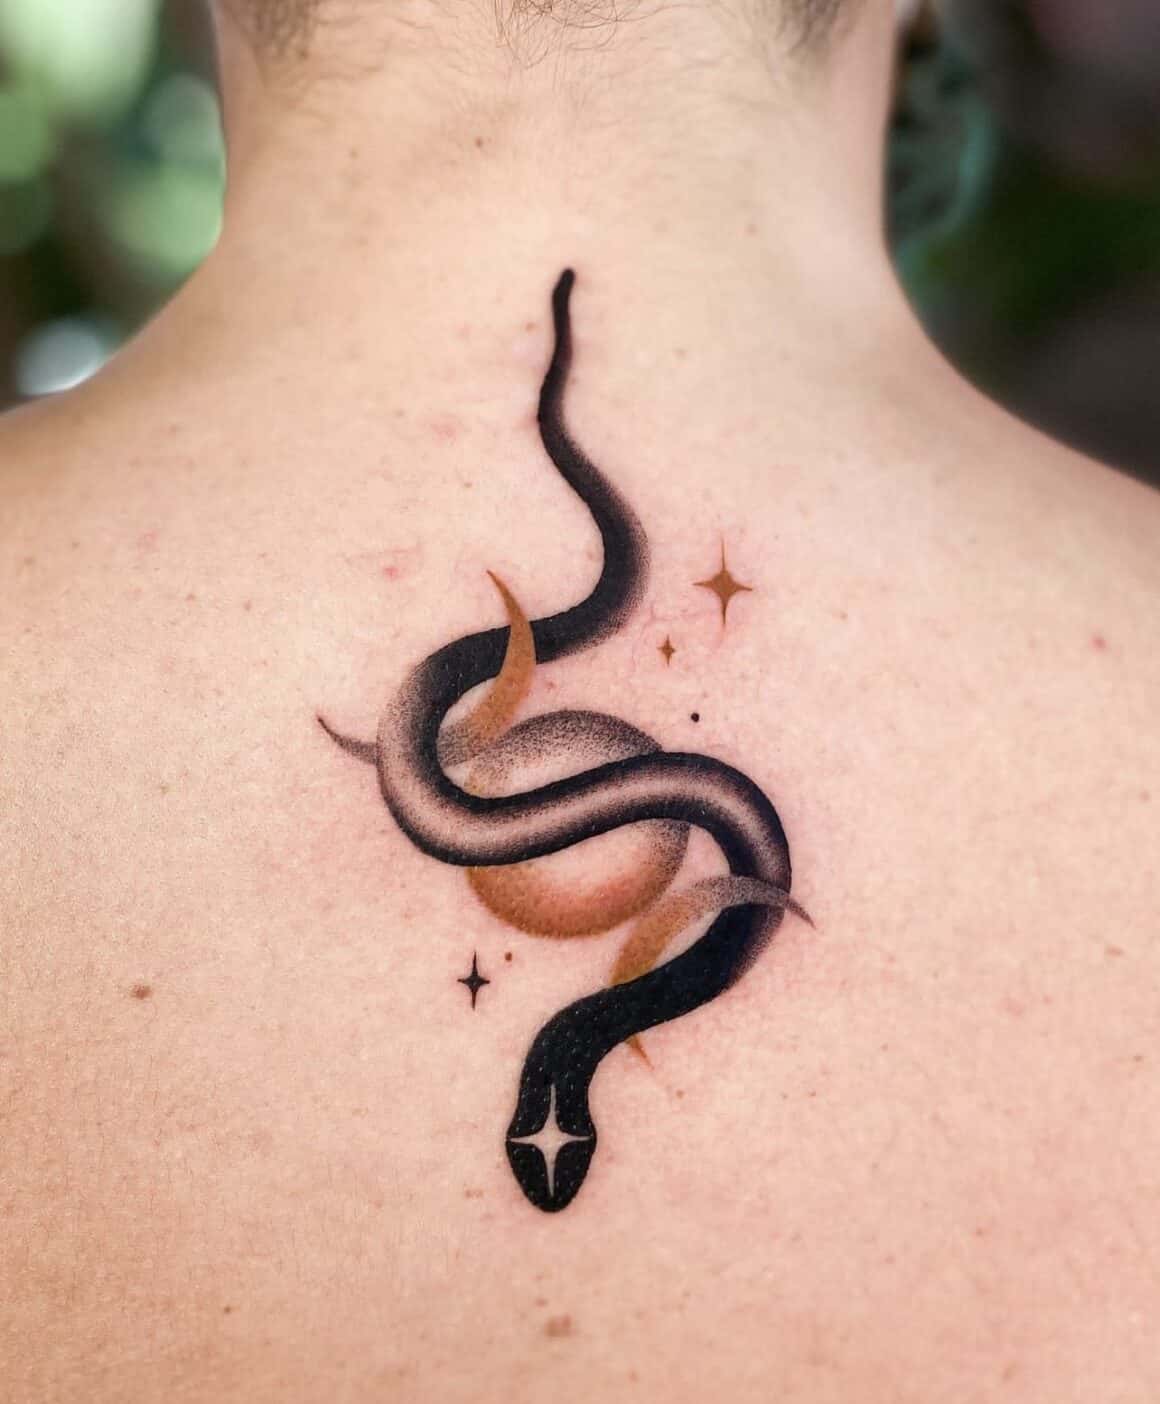 Tattoo uploaded by Pokeyhontas • Hand-Poked Snake Tattoo by Pokeyhontas at  KTREW Tattoo - Birmingham, UK #handpoked #handpoketattoo  #stickandpoketattoo #snaketattoos #tattoos #armtattoos • Tattoodo